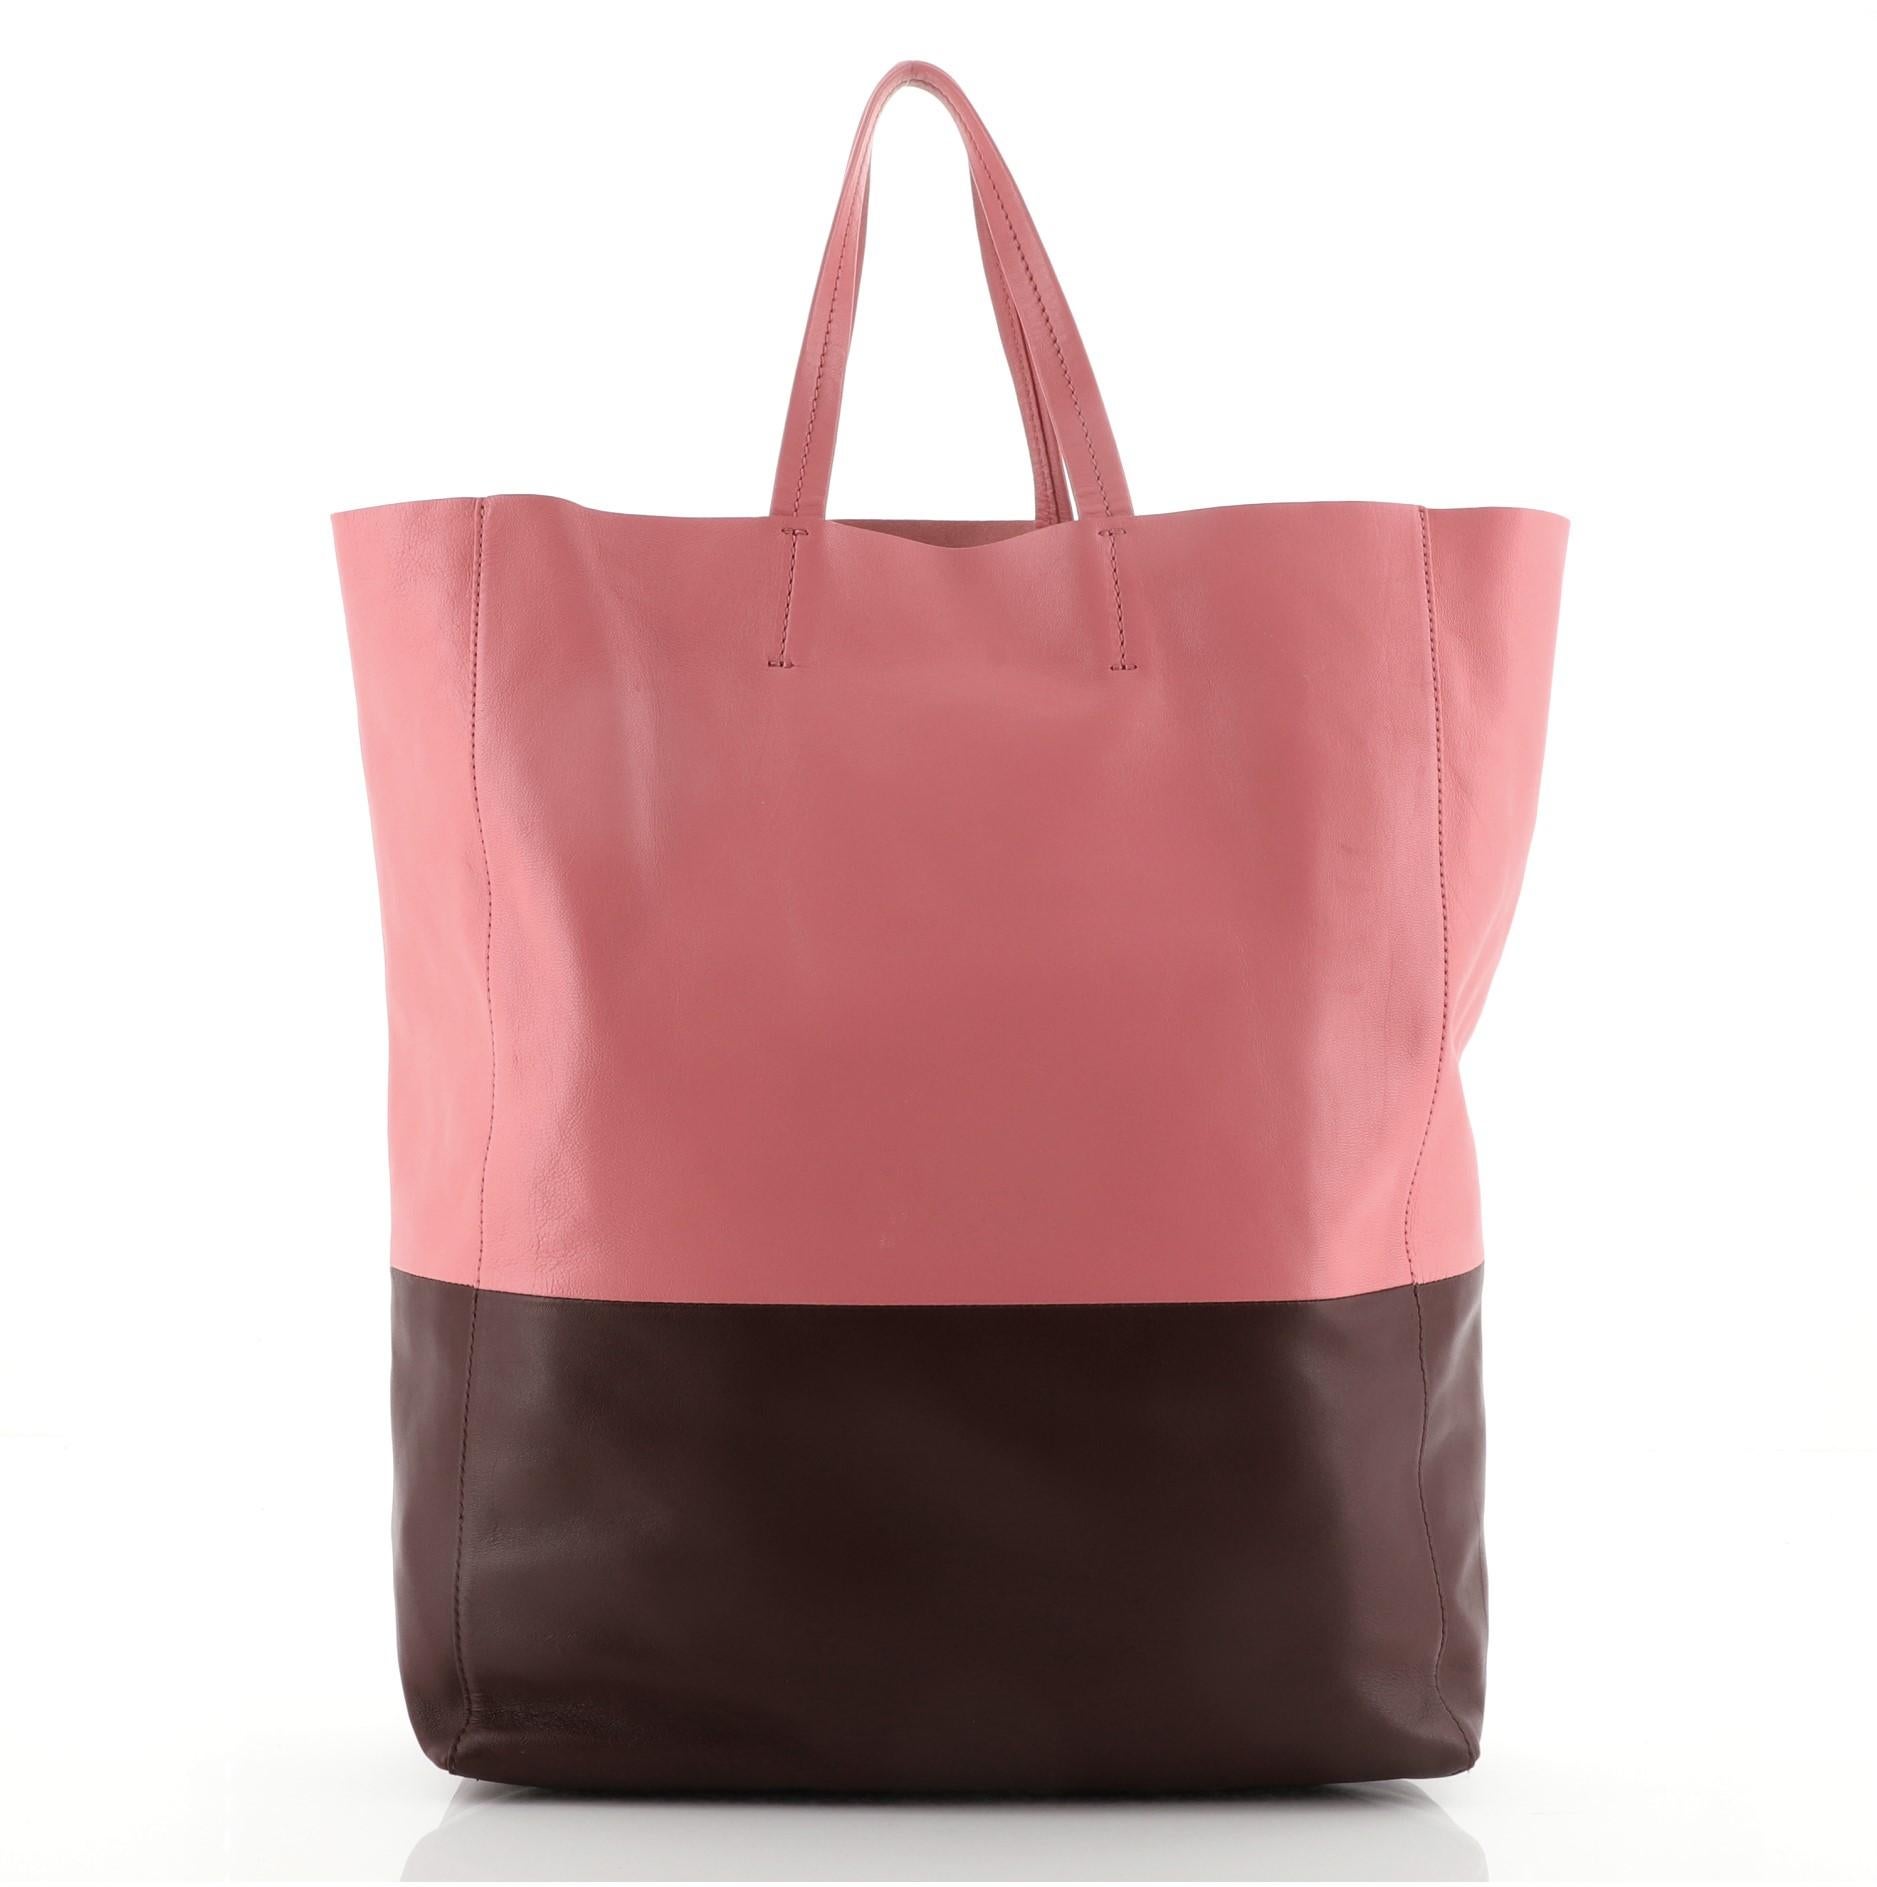 Celine Vertical Bi-Cabas Tote Leather Large
Pink Red Leather

Condition Details: Moderate wear on base corners, creasing scuffs and small marks on exterior. Wear and small glue stains on handles, wear in interior, scratches on